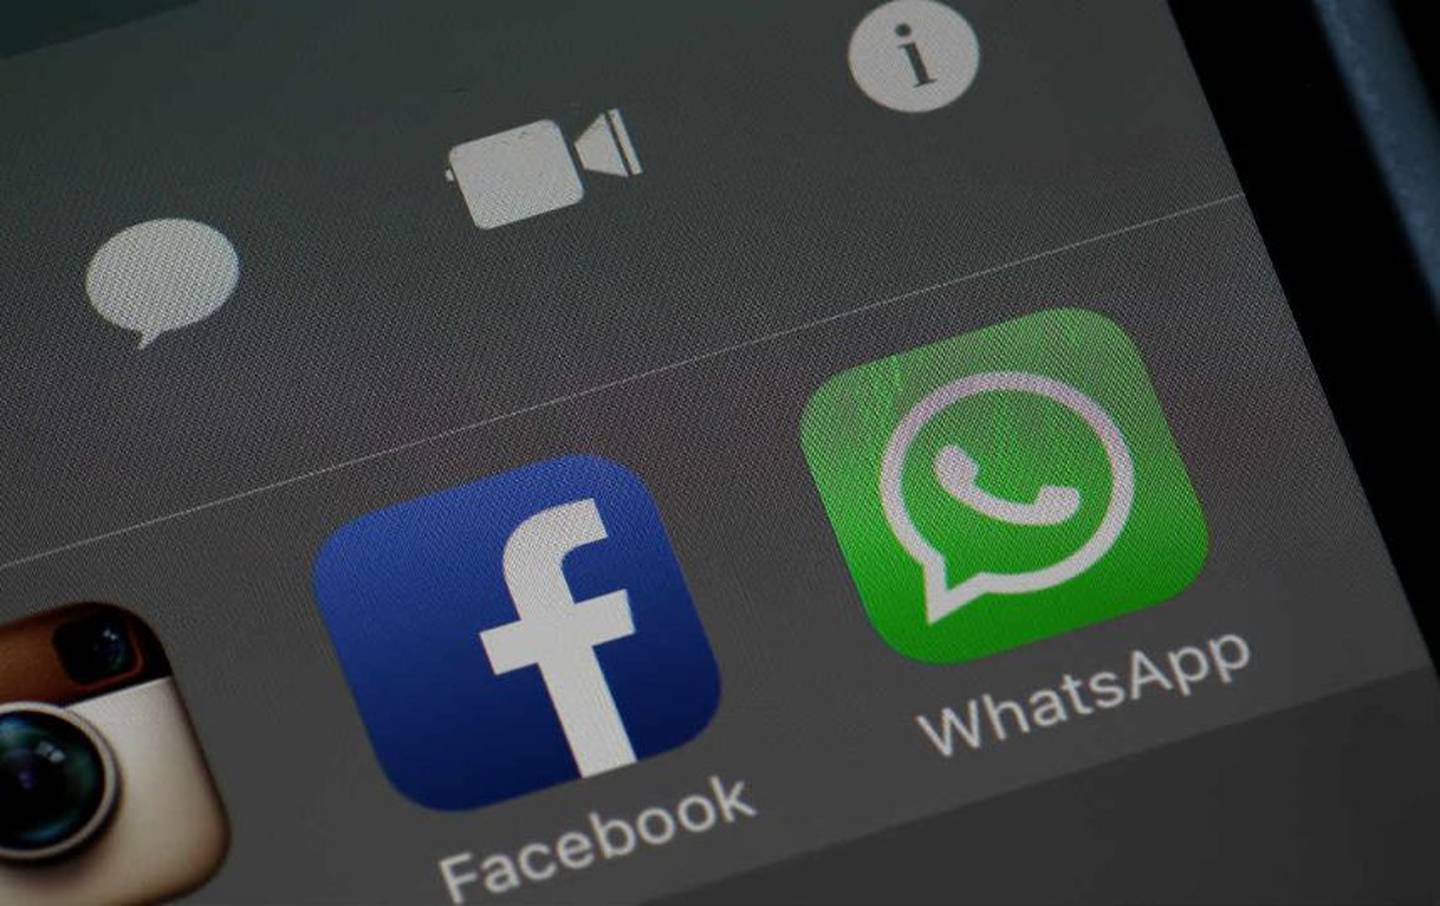 Do you feel under surveillance? Sinais that your WhatsApp may be being spied on